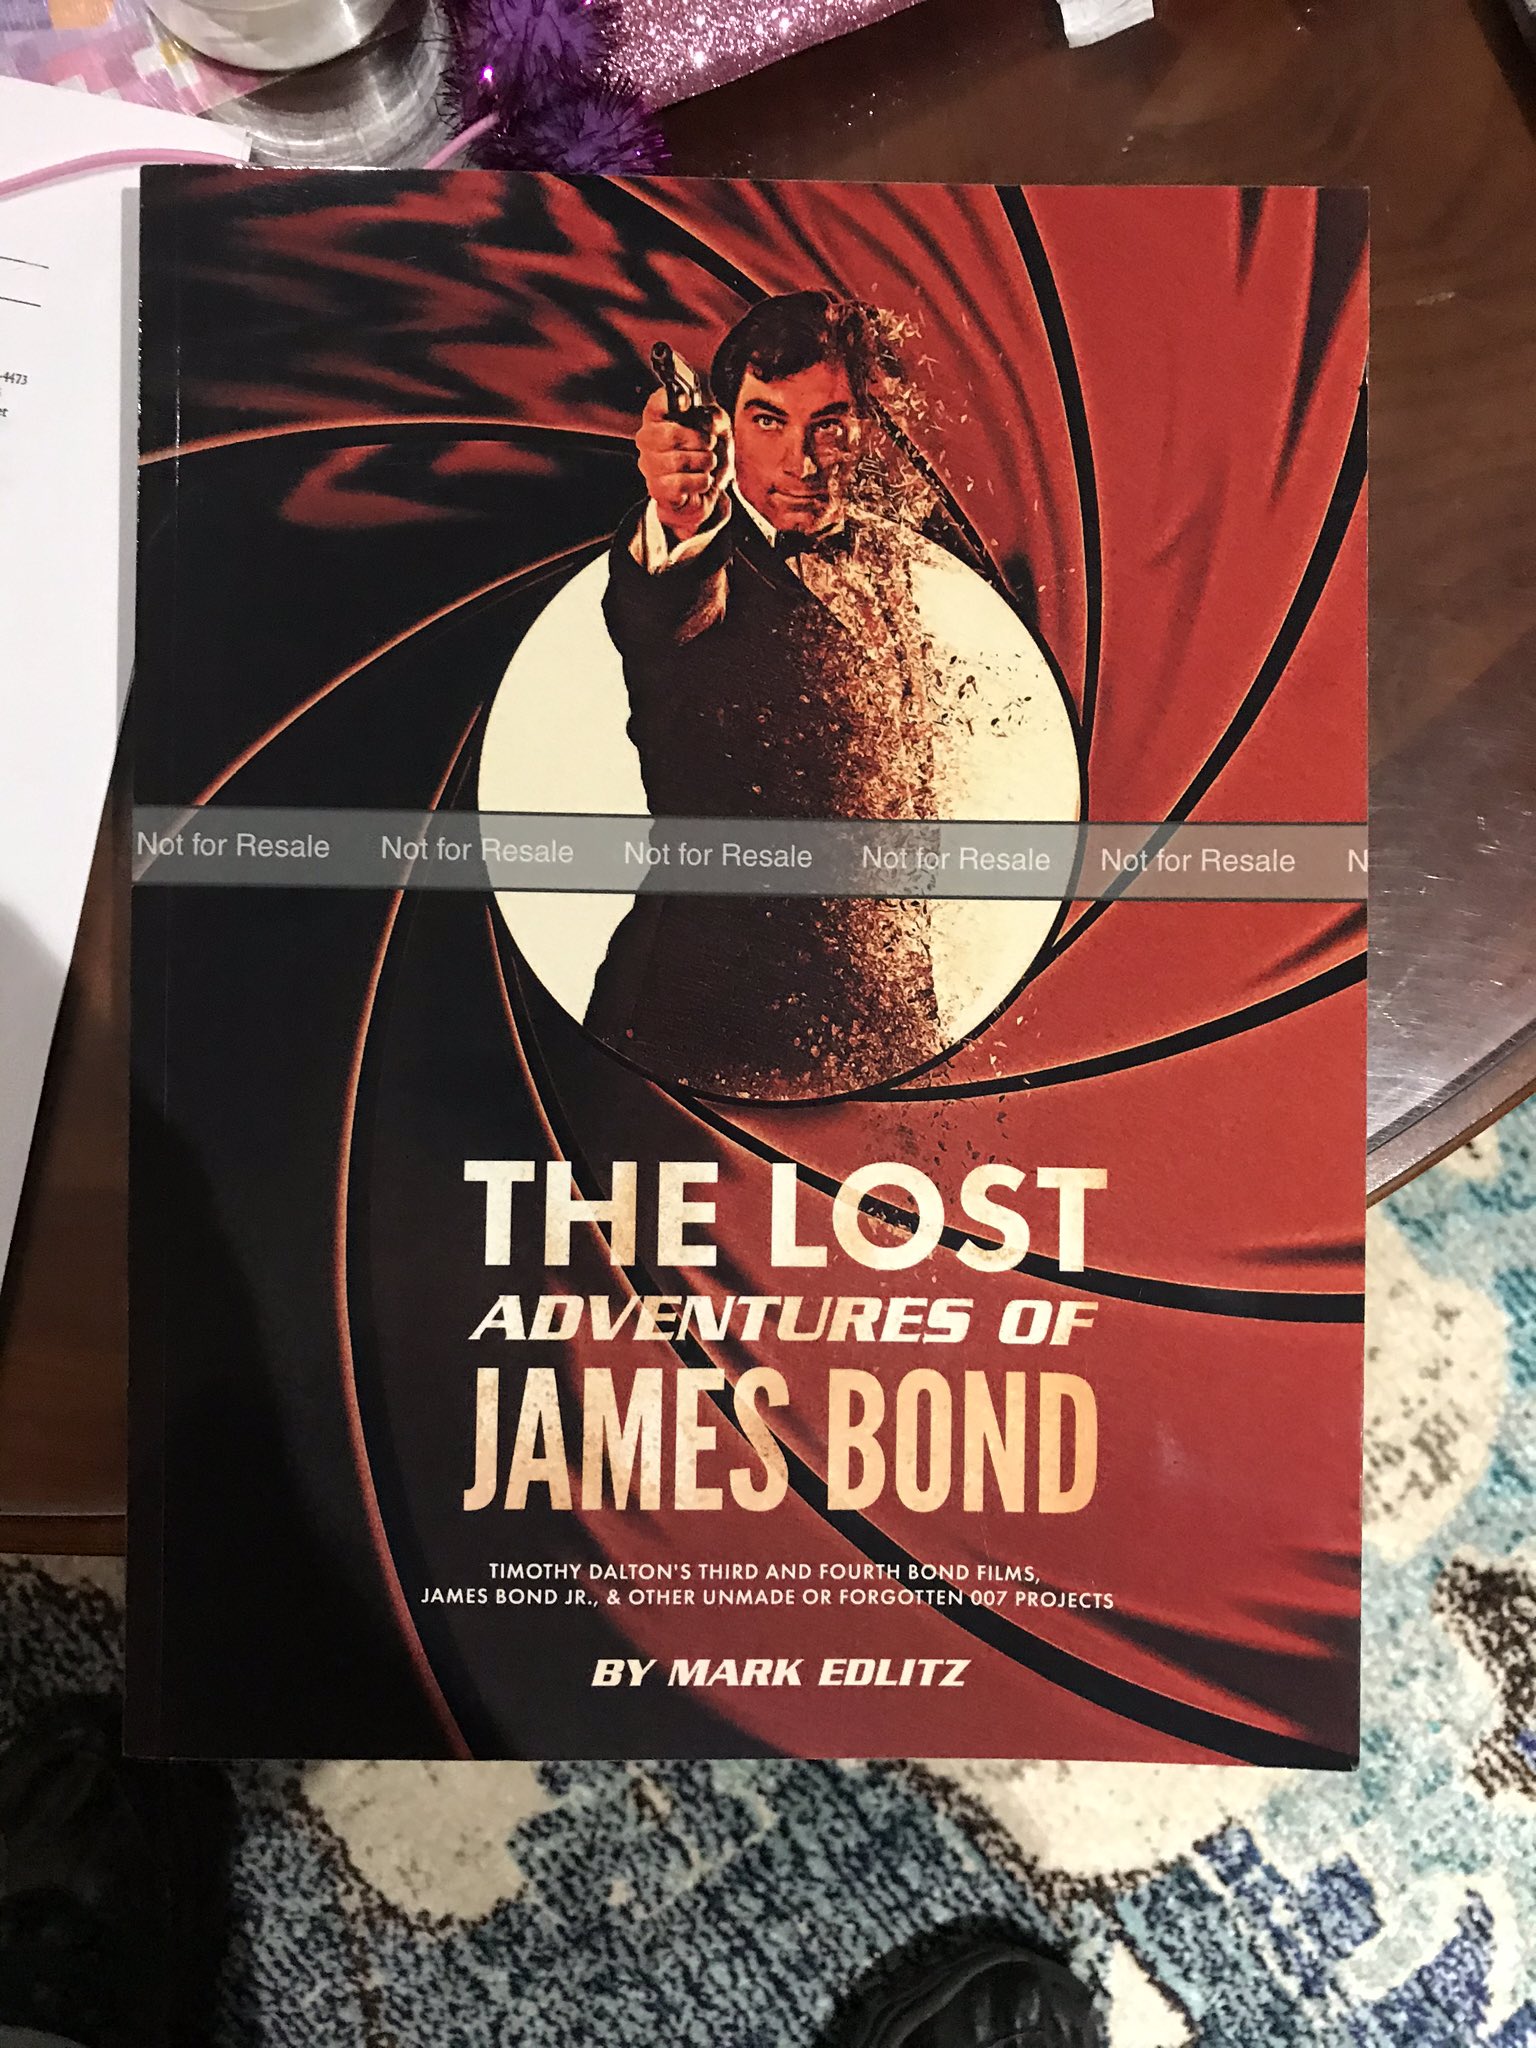 The Lost Adventures Of James Bond - book EnYwFRPXYAEXHFF